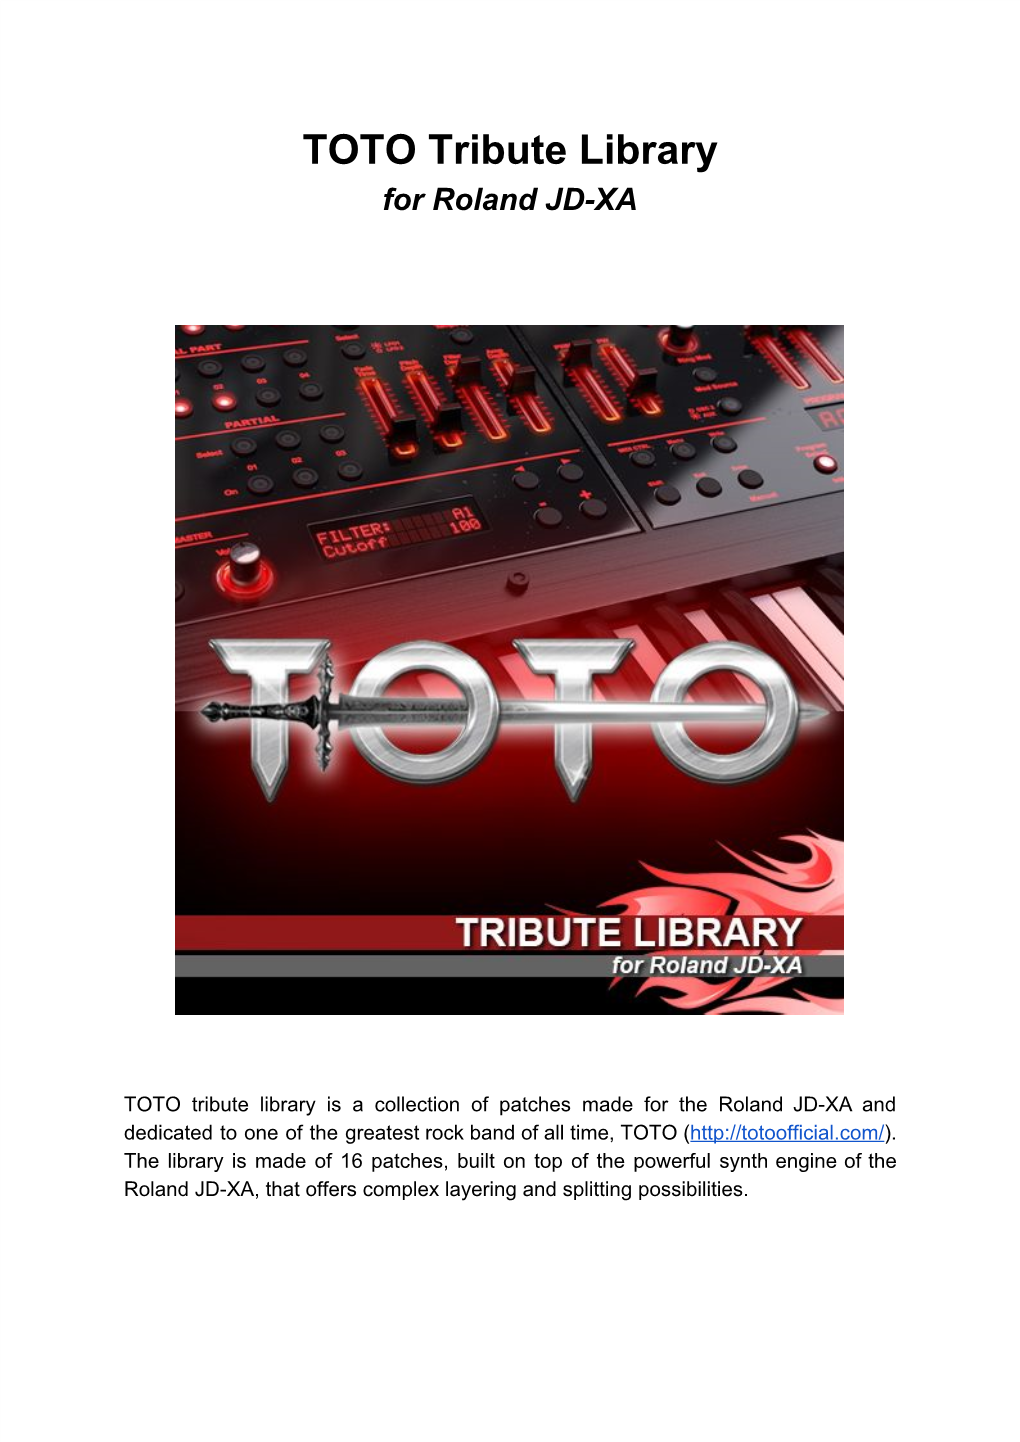 TOTO Tribute Library for Roland JD-XA